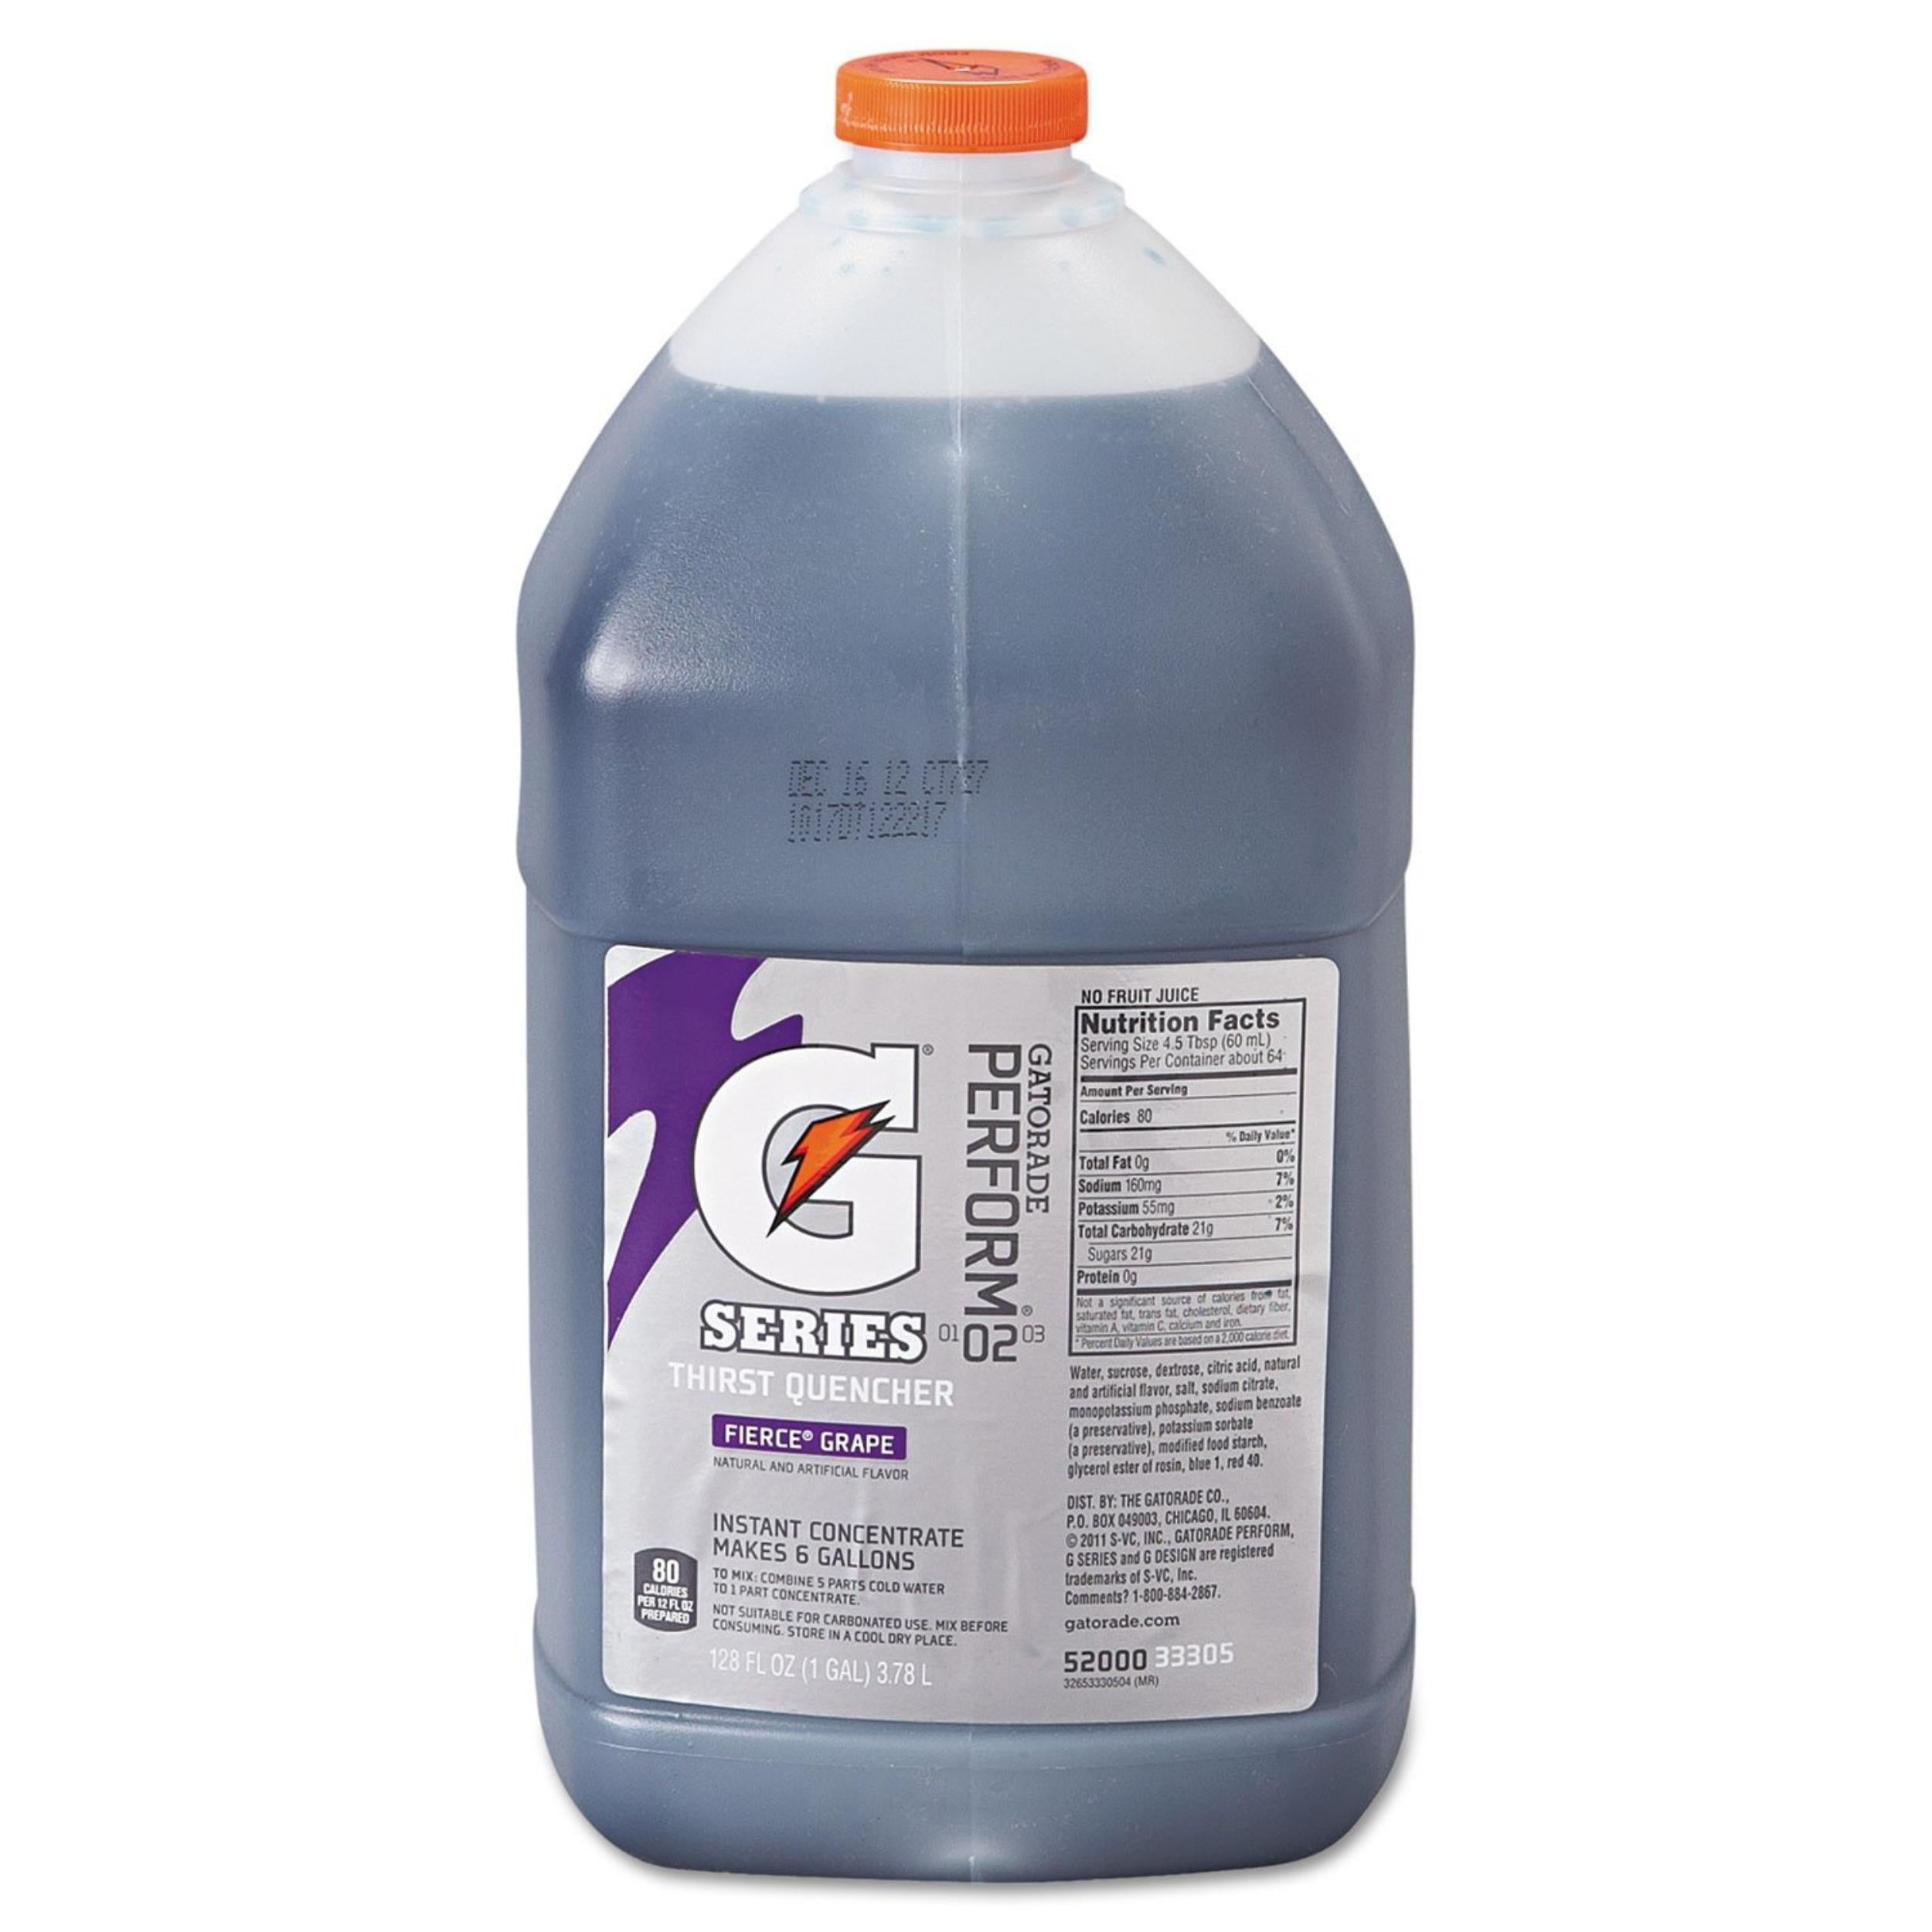 GATORADE- Fierce Thirst Quencher Instant Concentrate (MULTIPLE FLAVORS AVAILABLE) 4 PACK